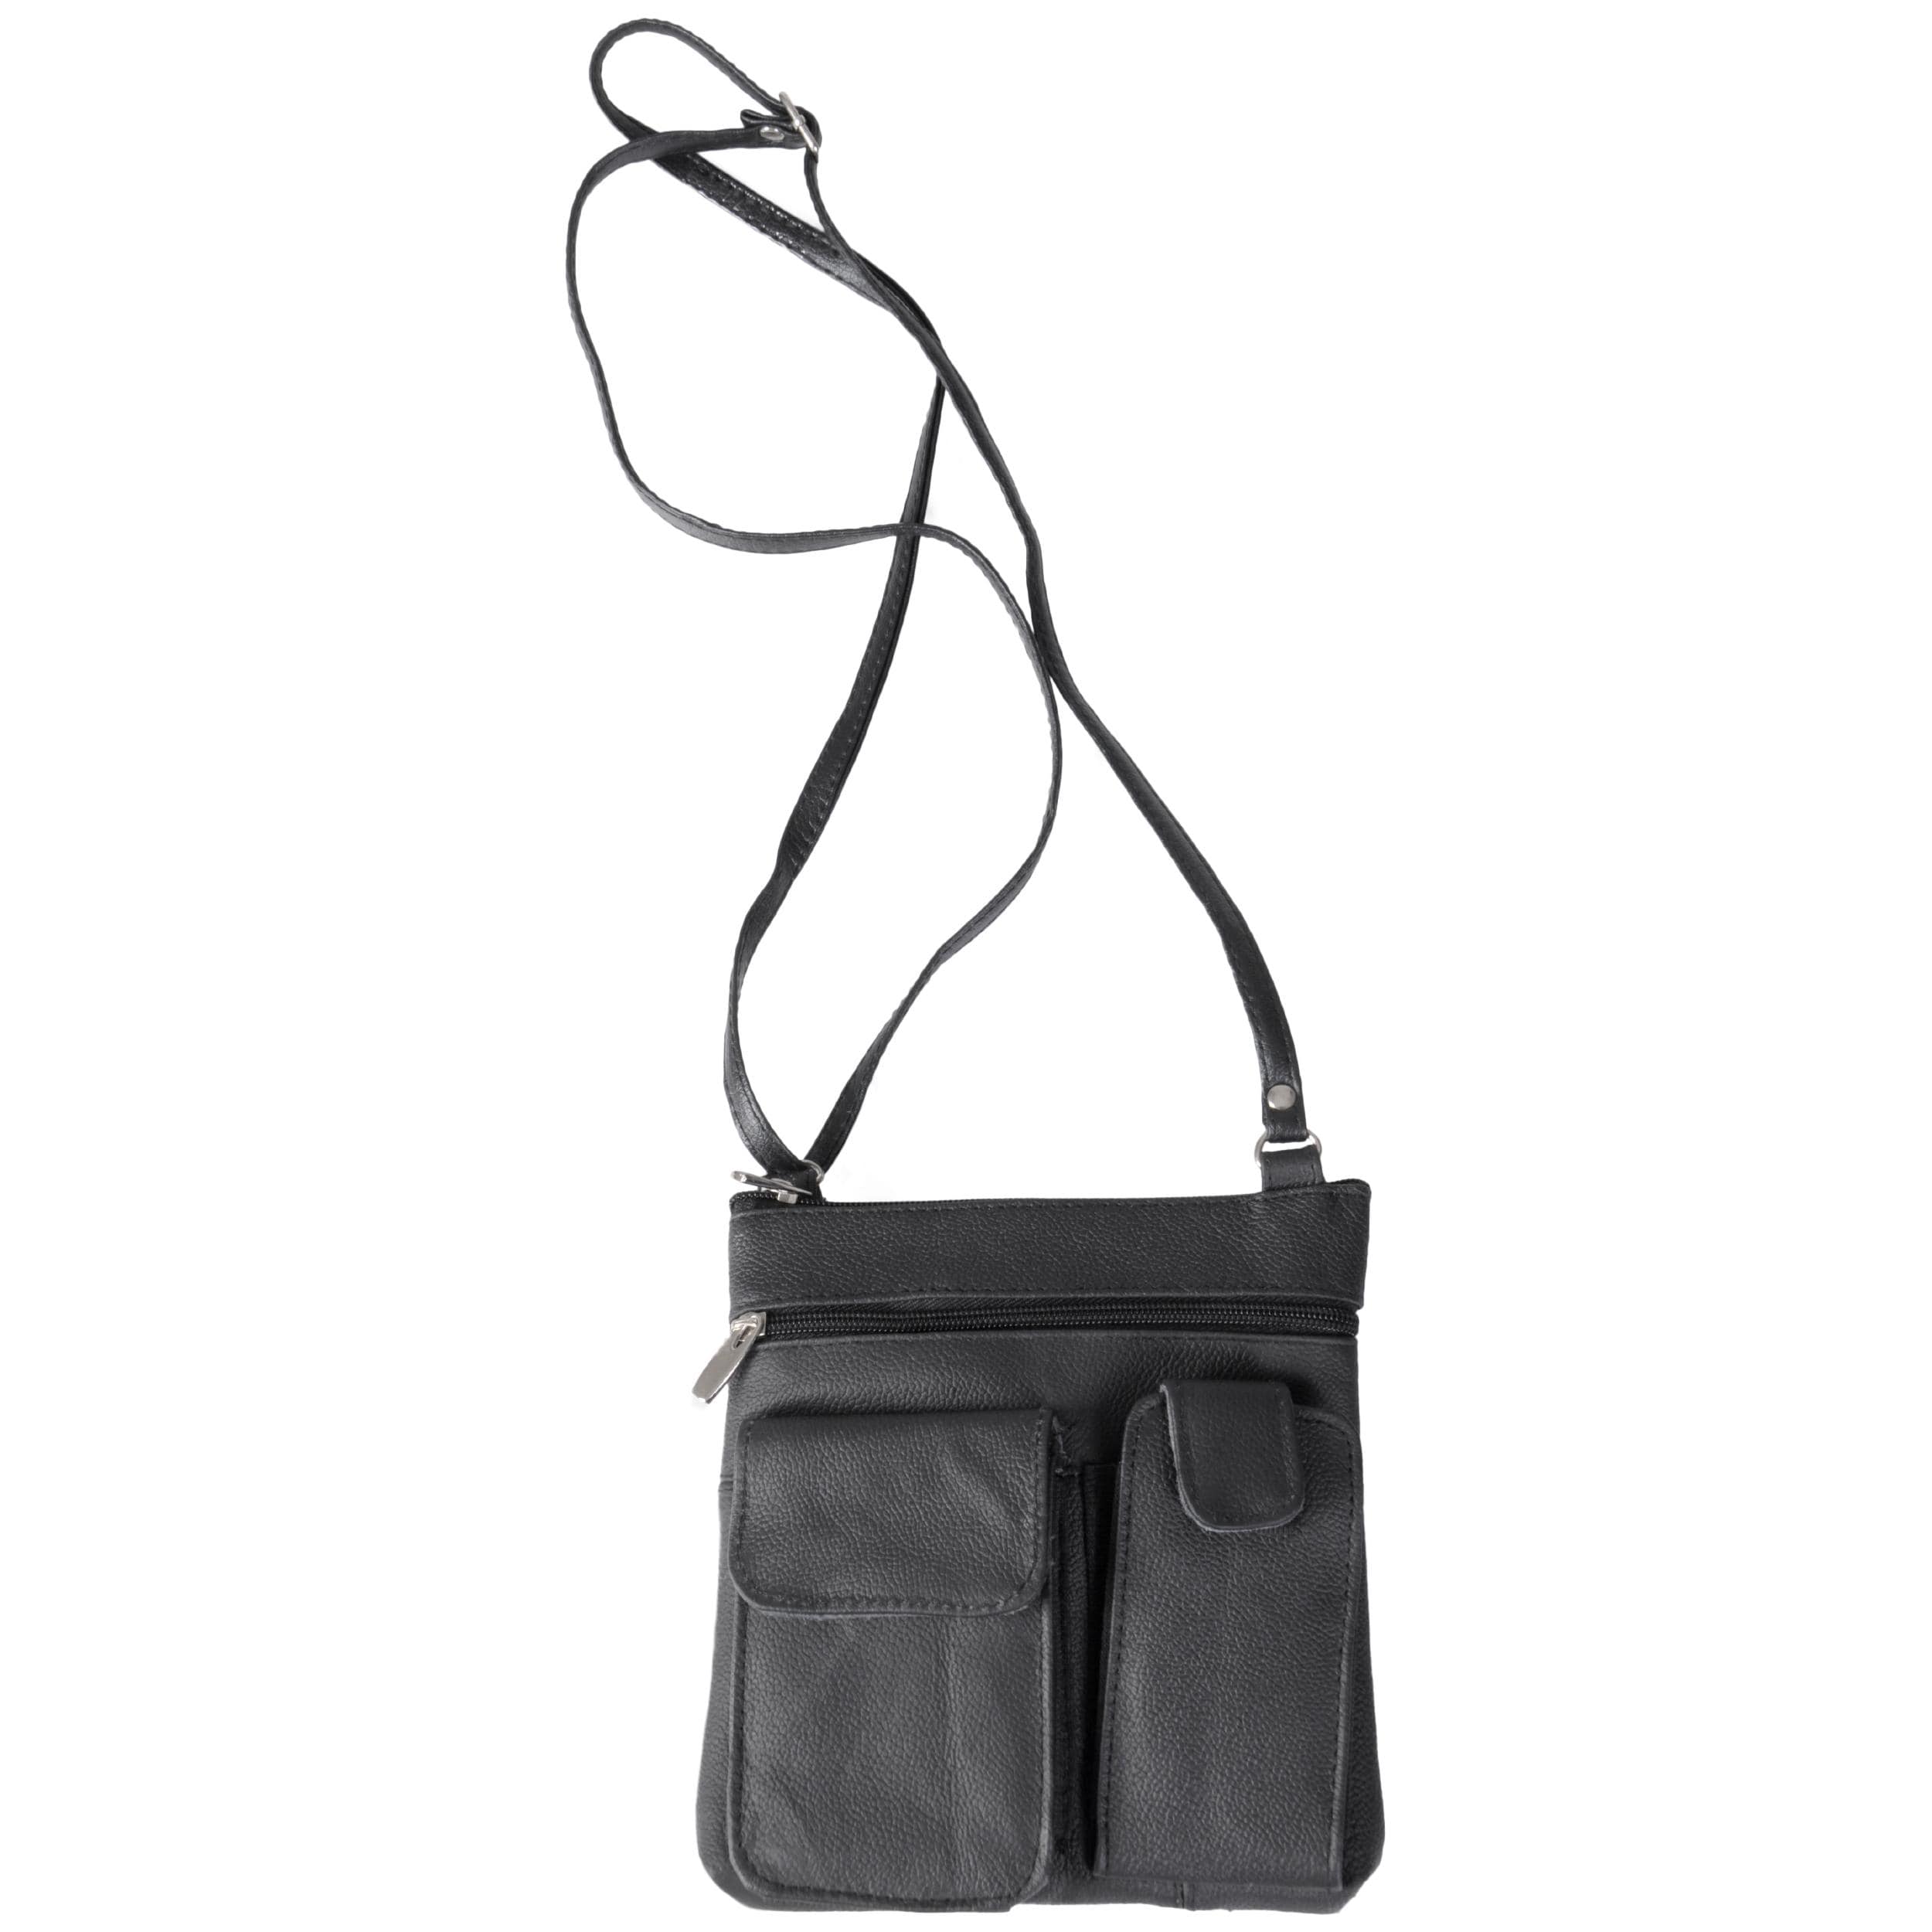 Journee Collection Black Genuine-Leather Cross-Body Bag